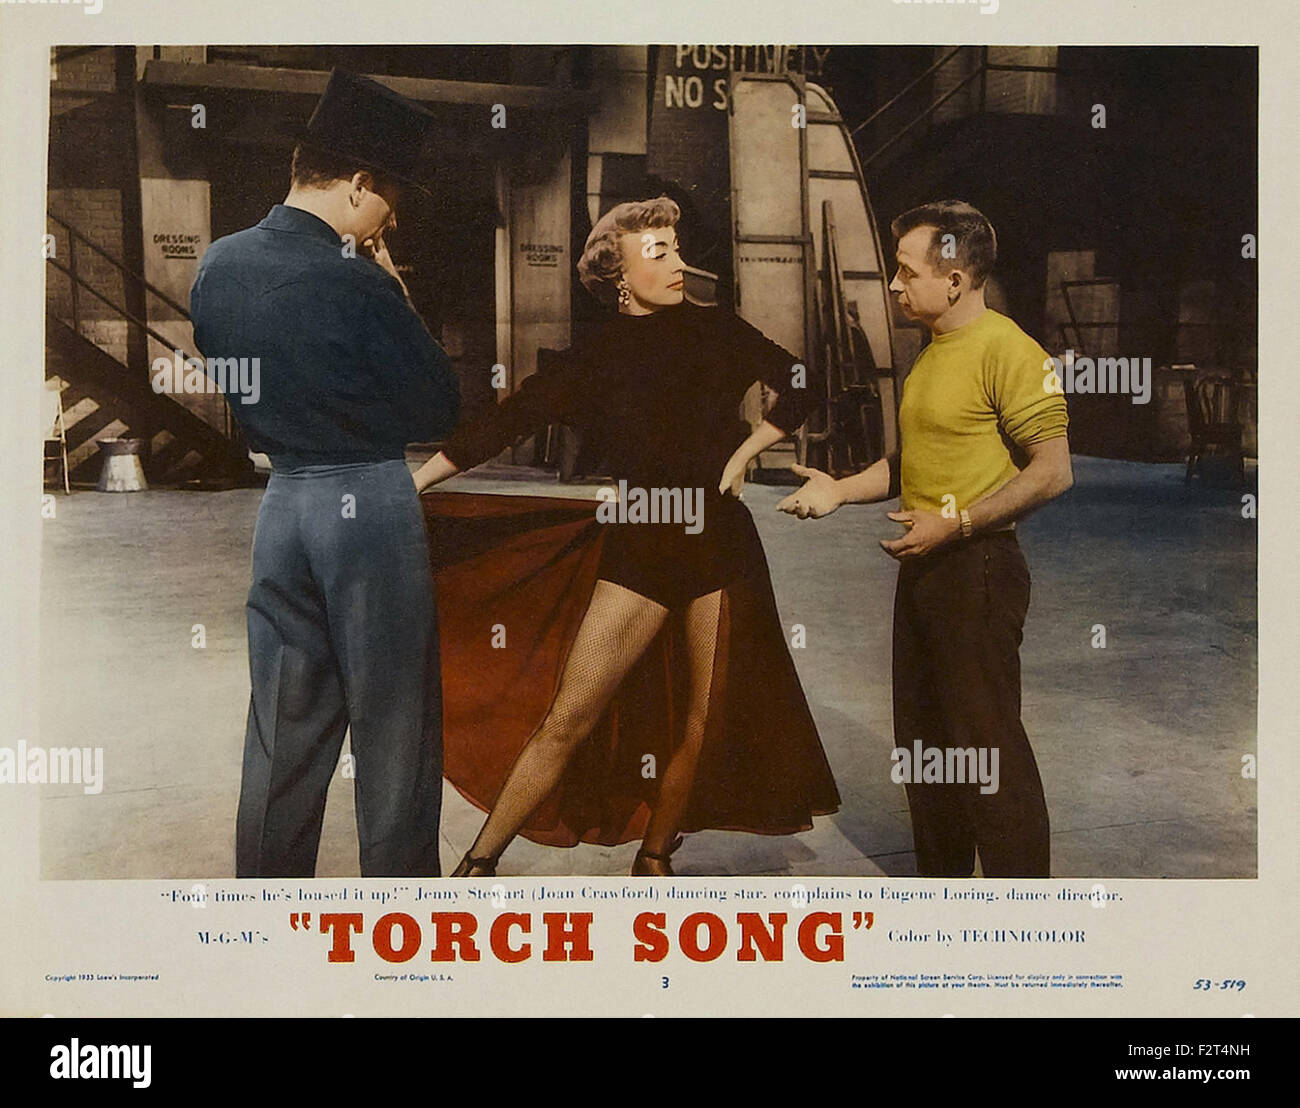 Torch Song - Movie Poster Stock Photo